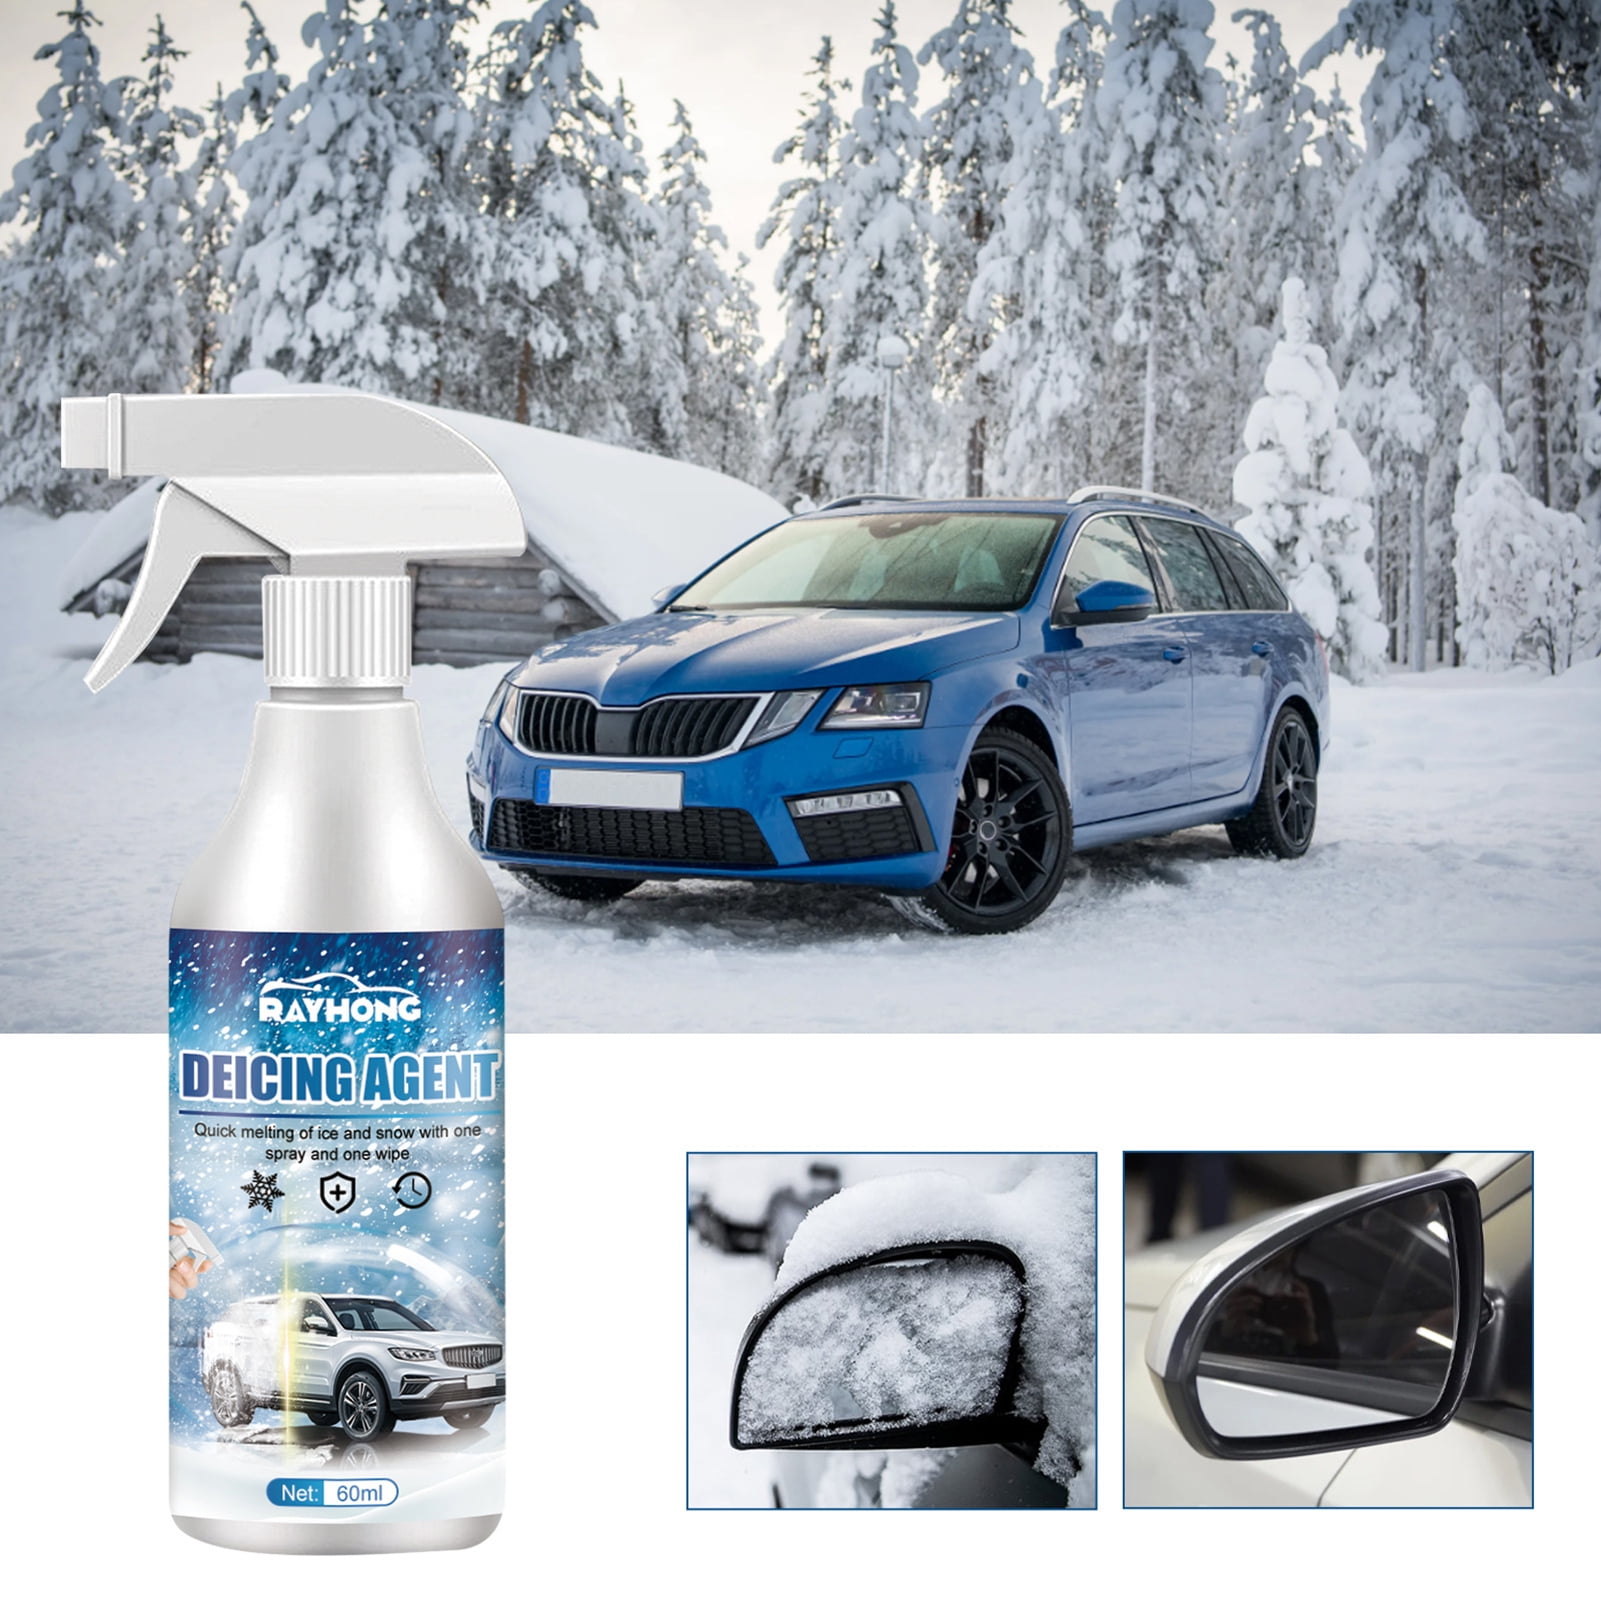 Cheap PDTO Car De-Icing Spray Deicing Agent Windshield Ice Remover